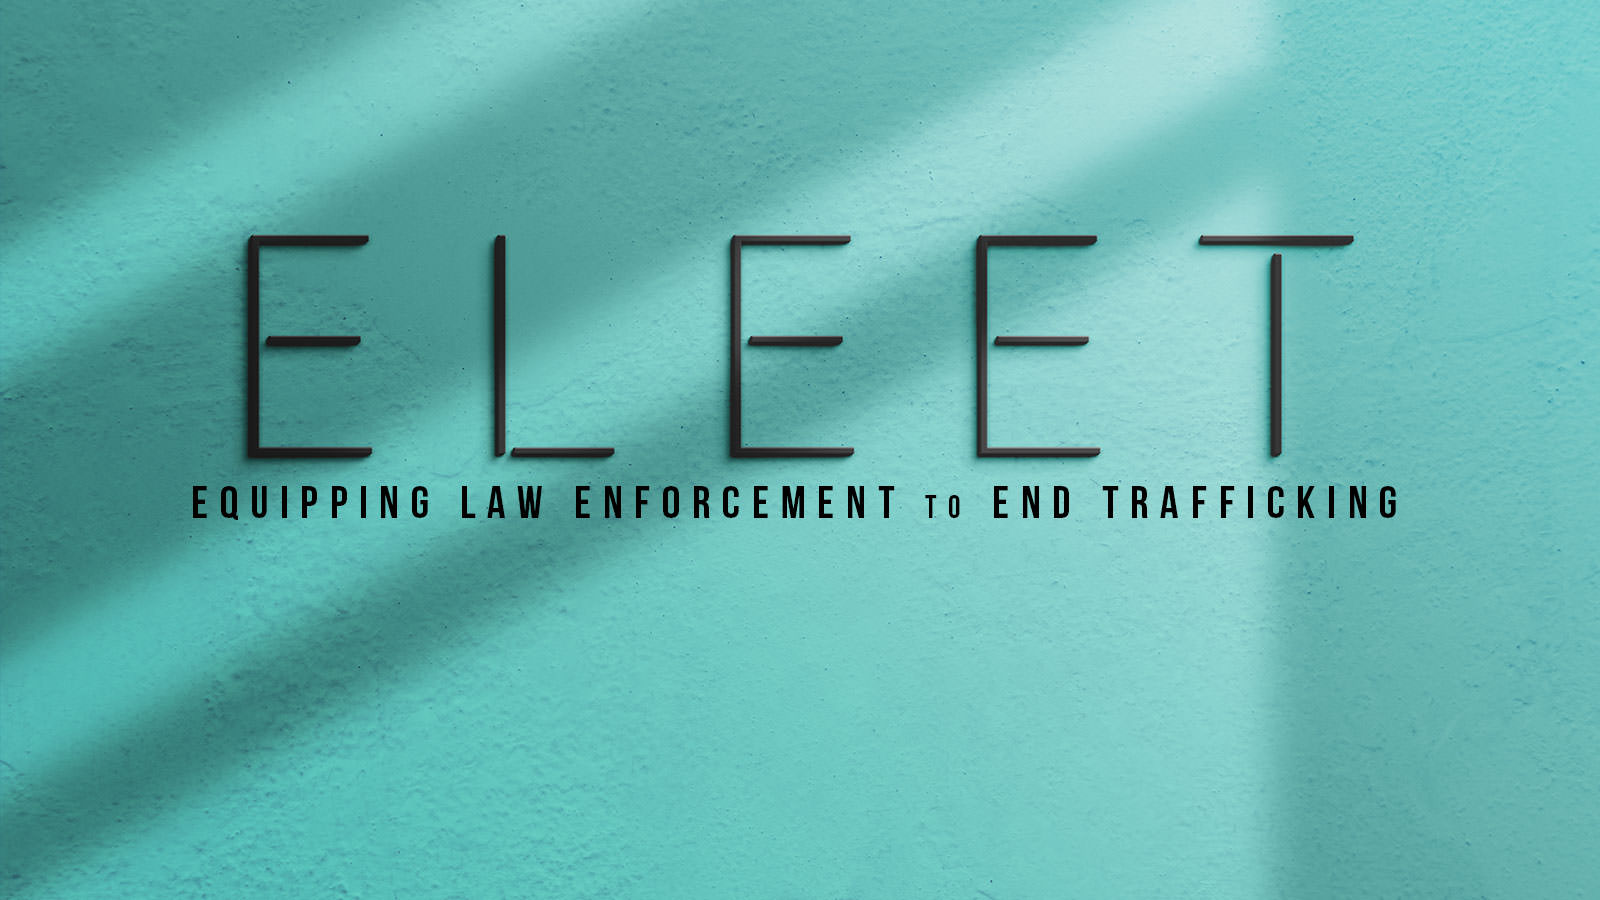 NCOSE's ELEET (Equipping Law Enforcement to End Trafficking) Initiative